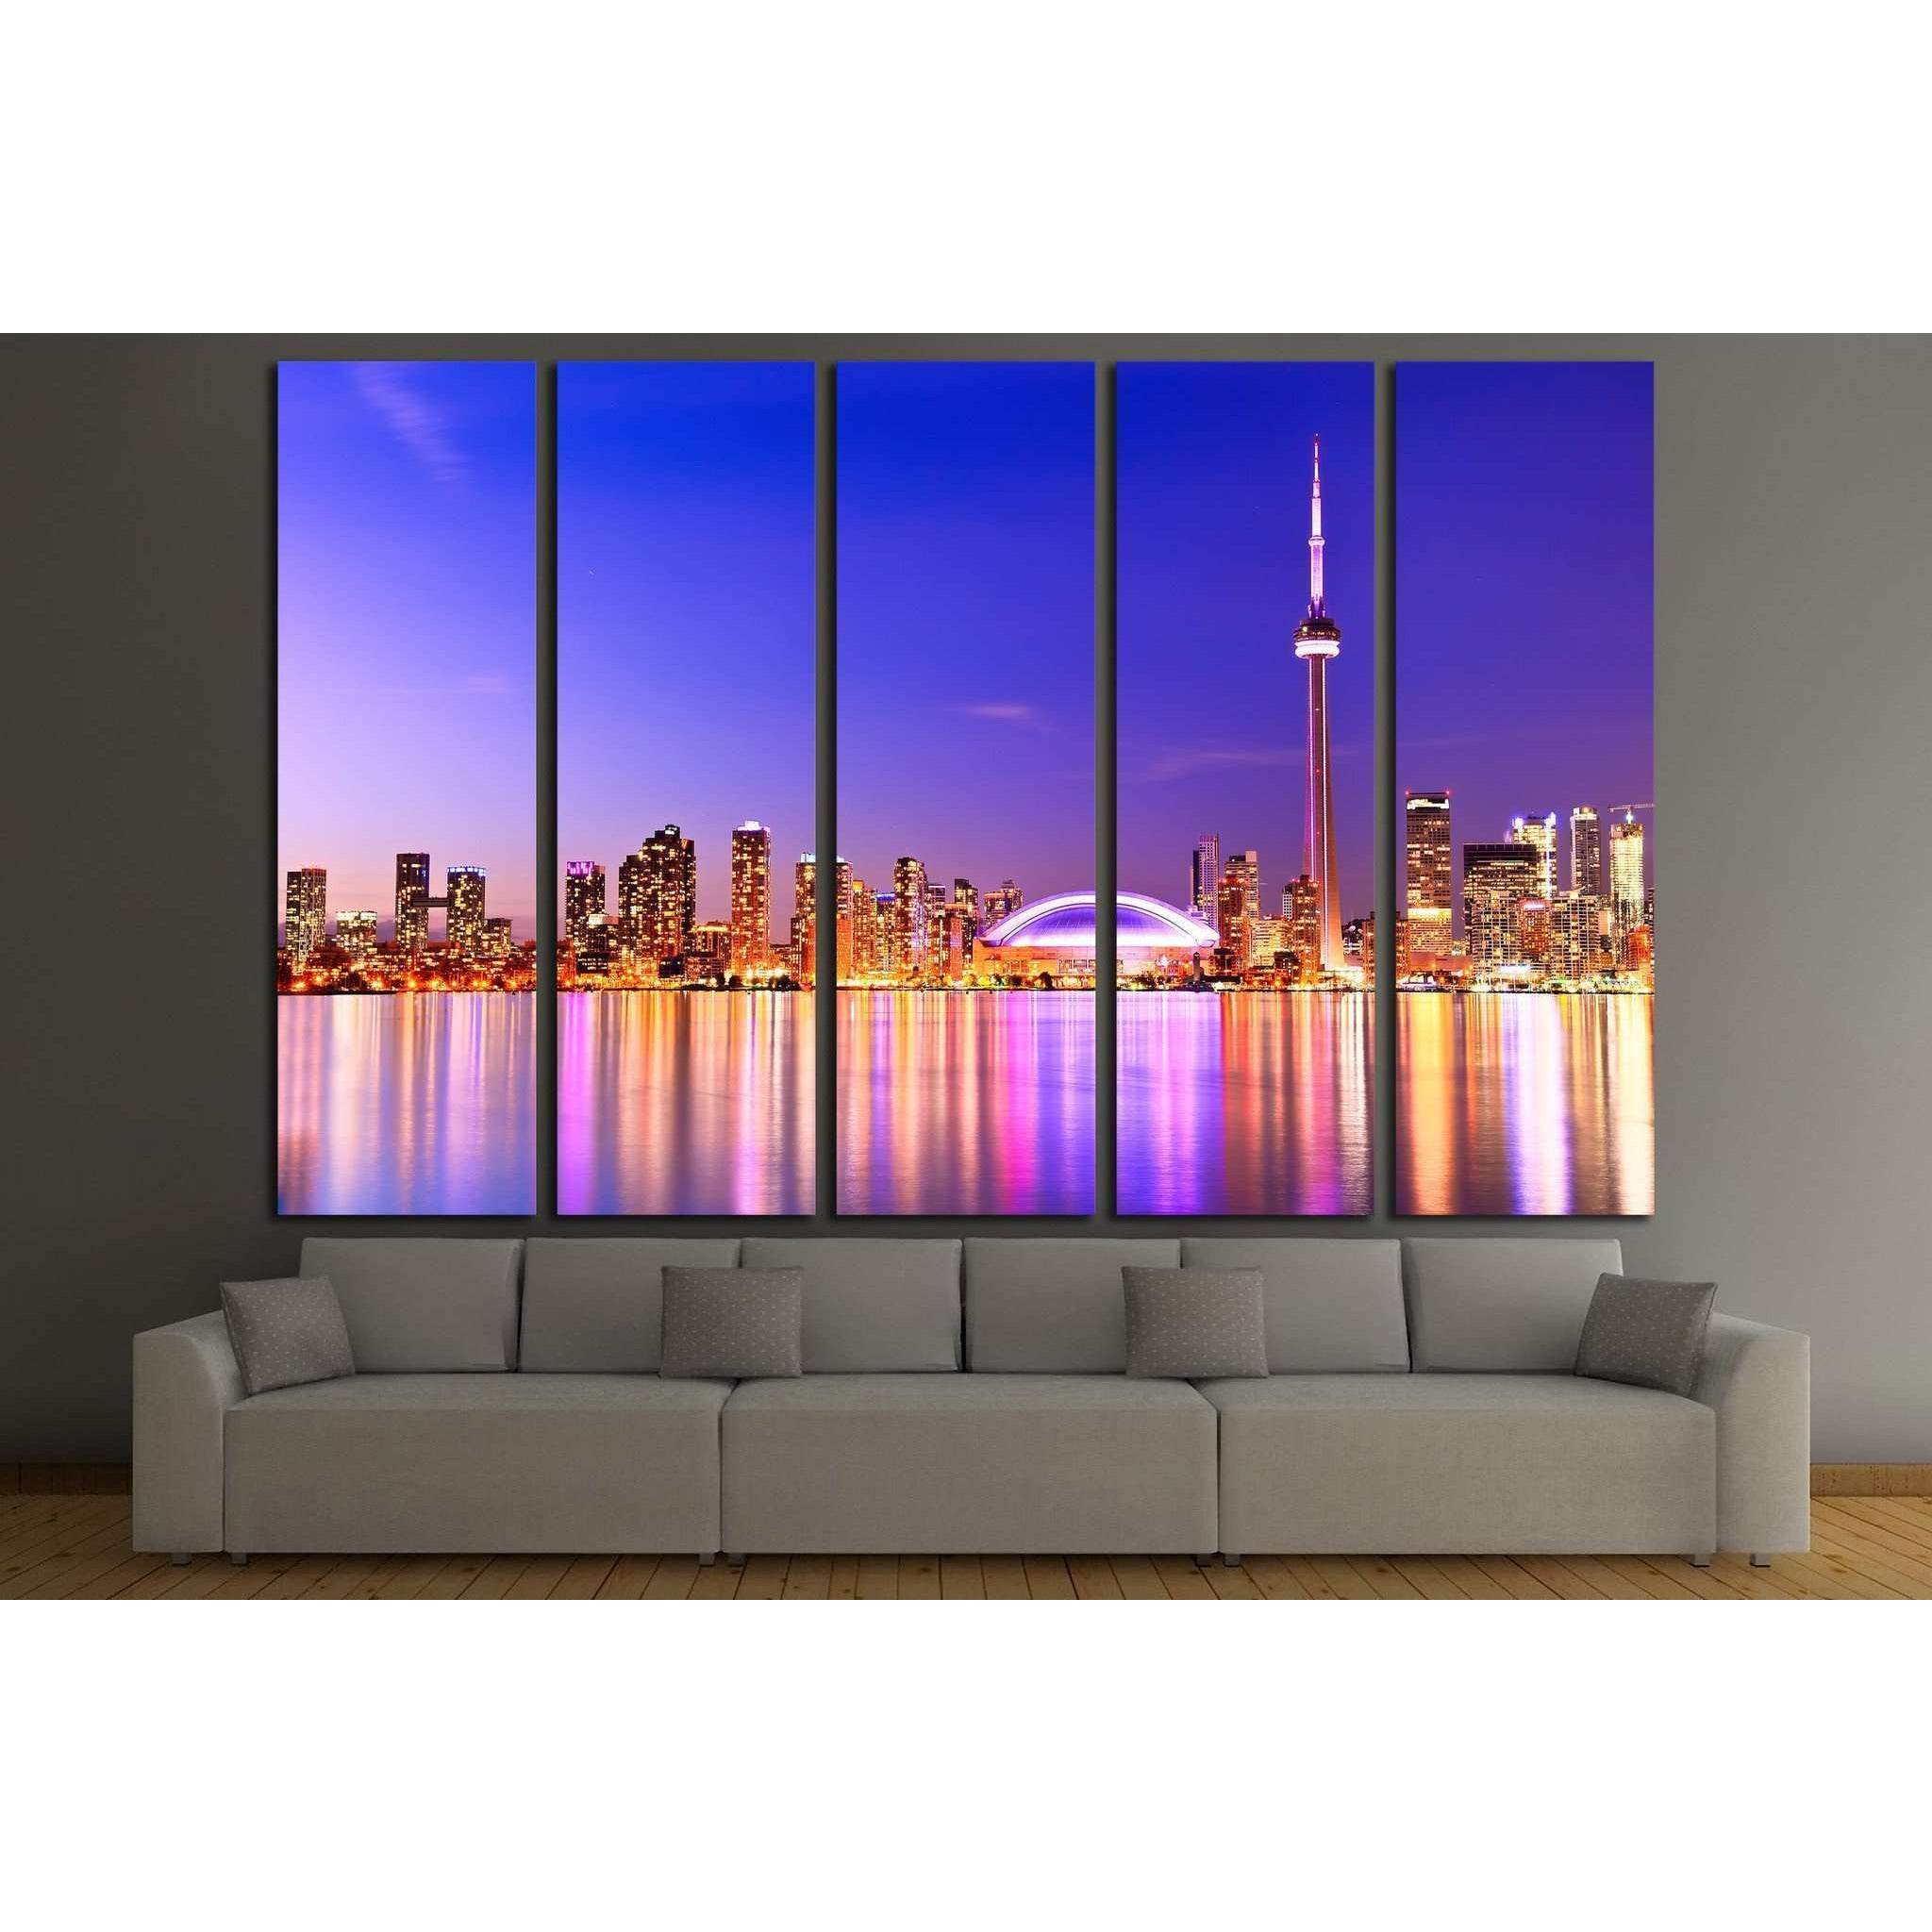 The Reflection of Toronto skyline in Ontario, Canada №2055 Ready to Hang Canvas Print